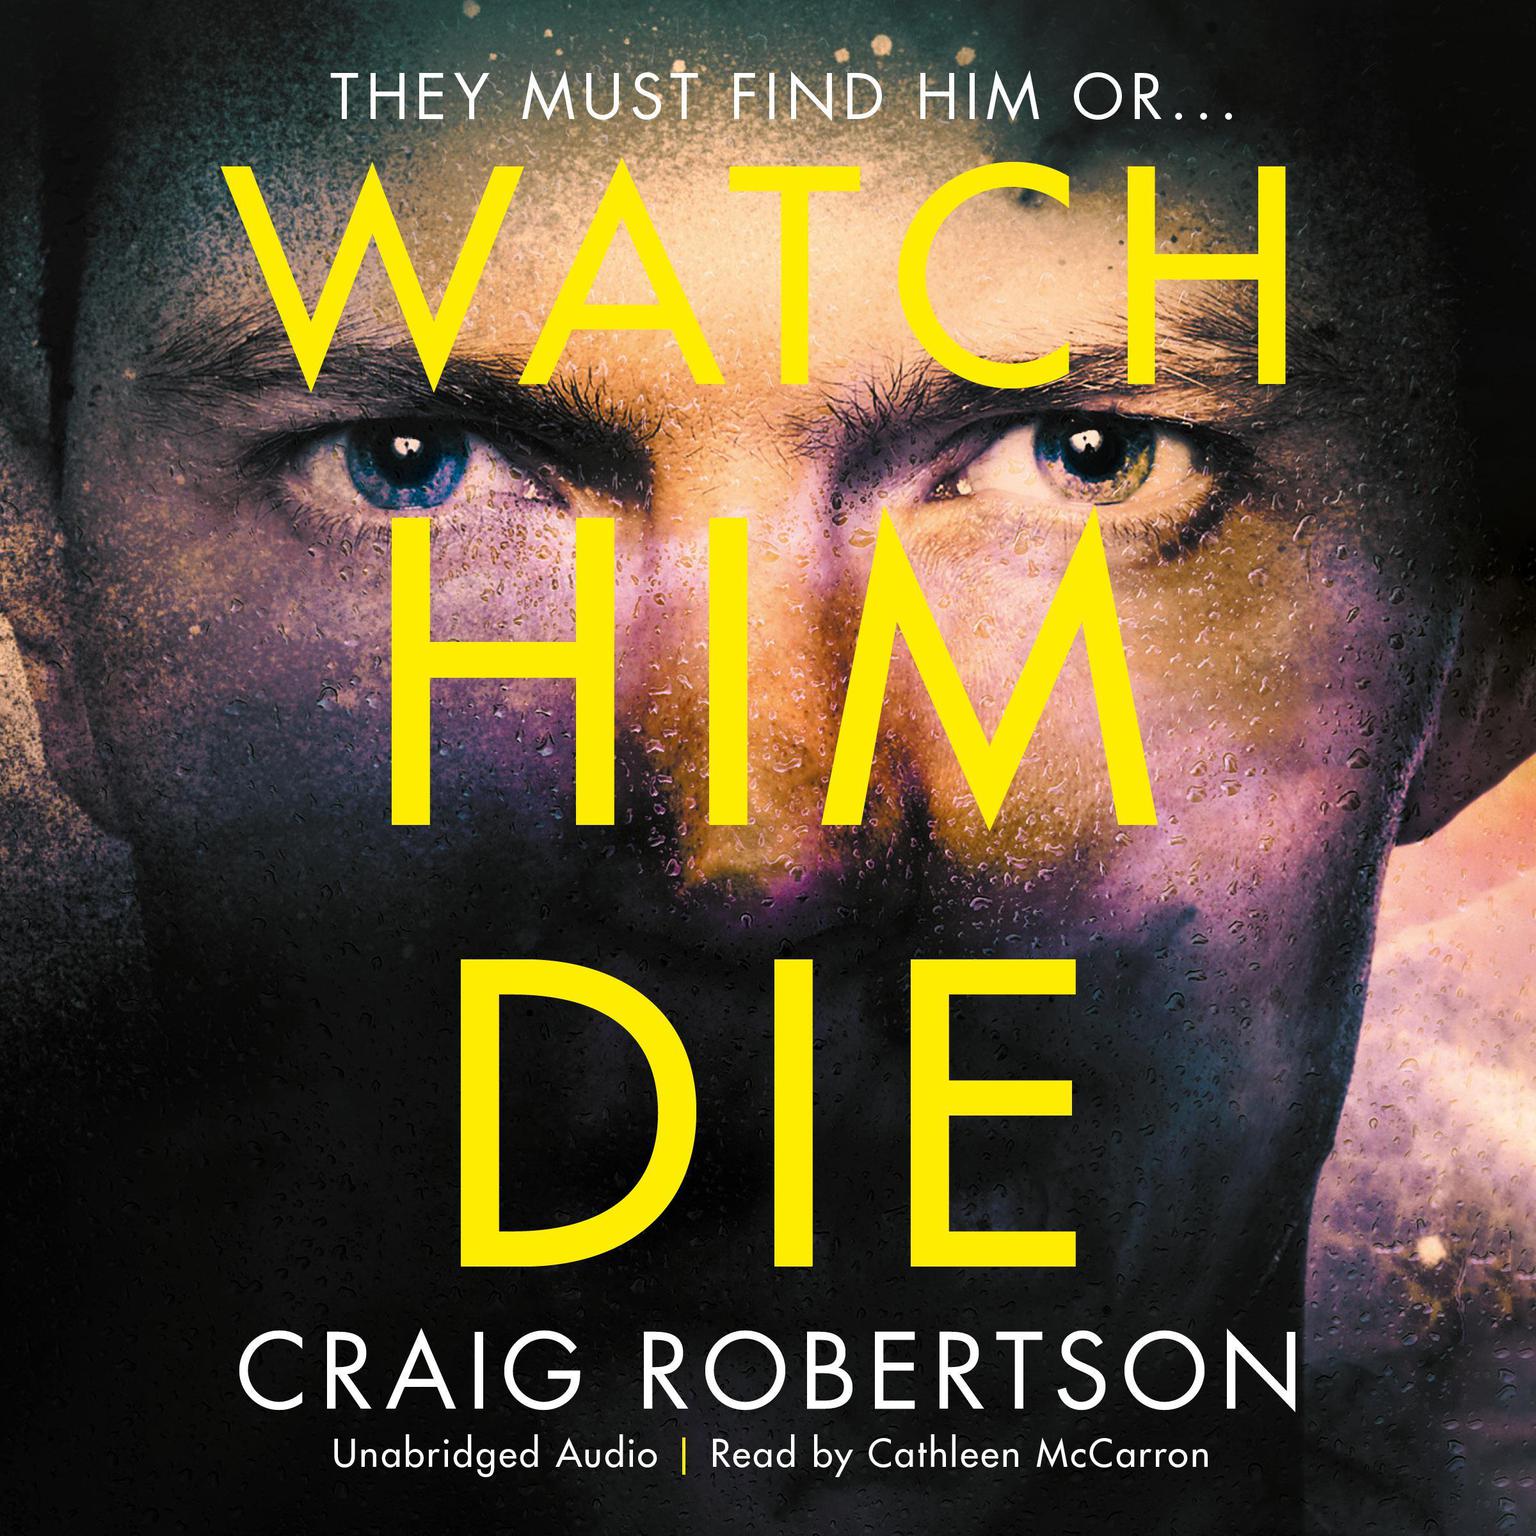 Watch Him Die: Truly difficult to put down Audiobook, by Craig Robertson